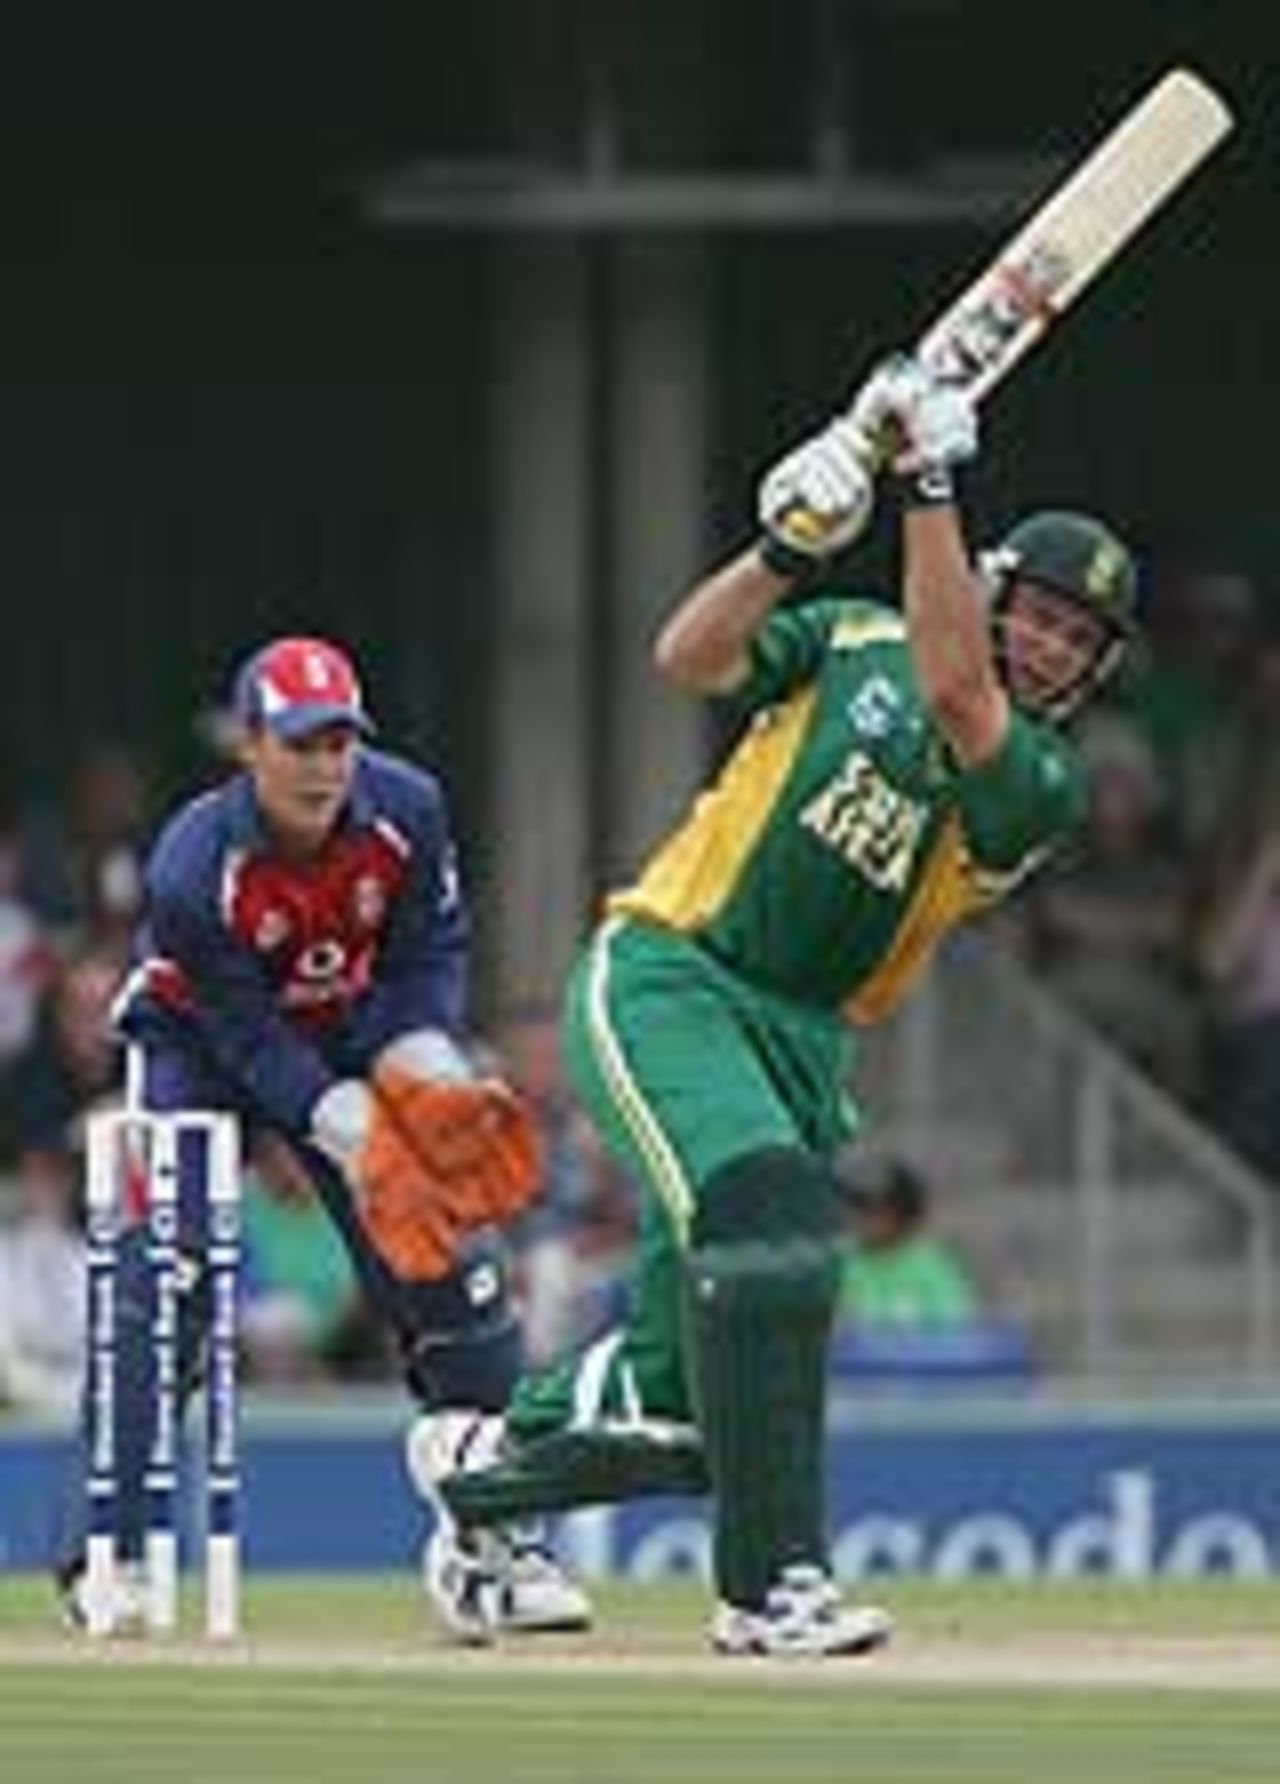 Graeme Smith gives South Africa the upper hand in the fifth one-day international at Buffalo Park, East London, February 8, 2005